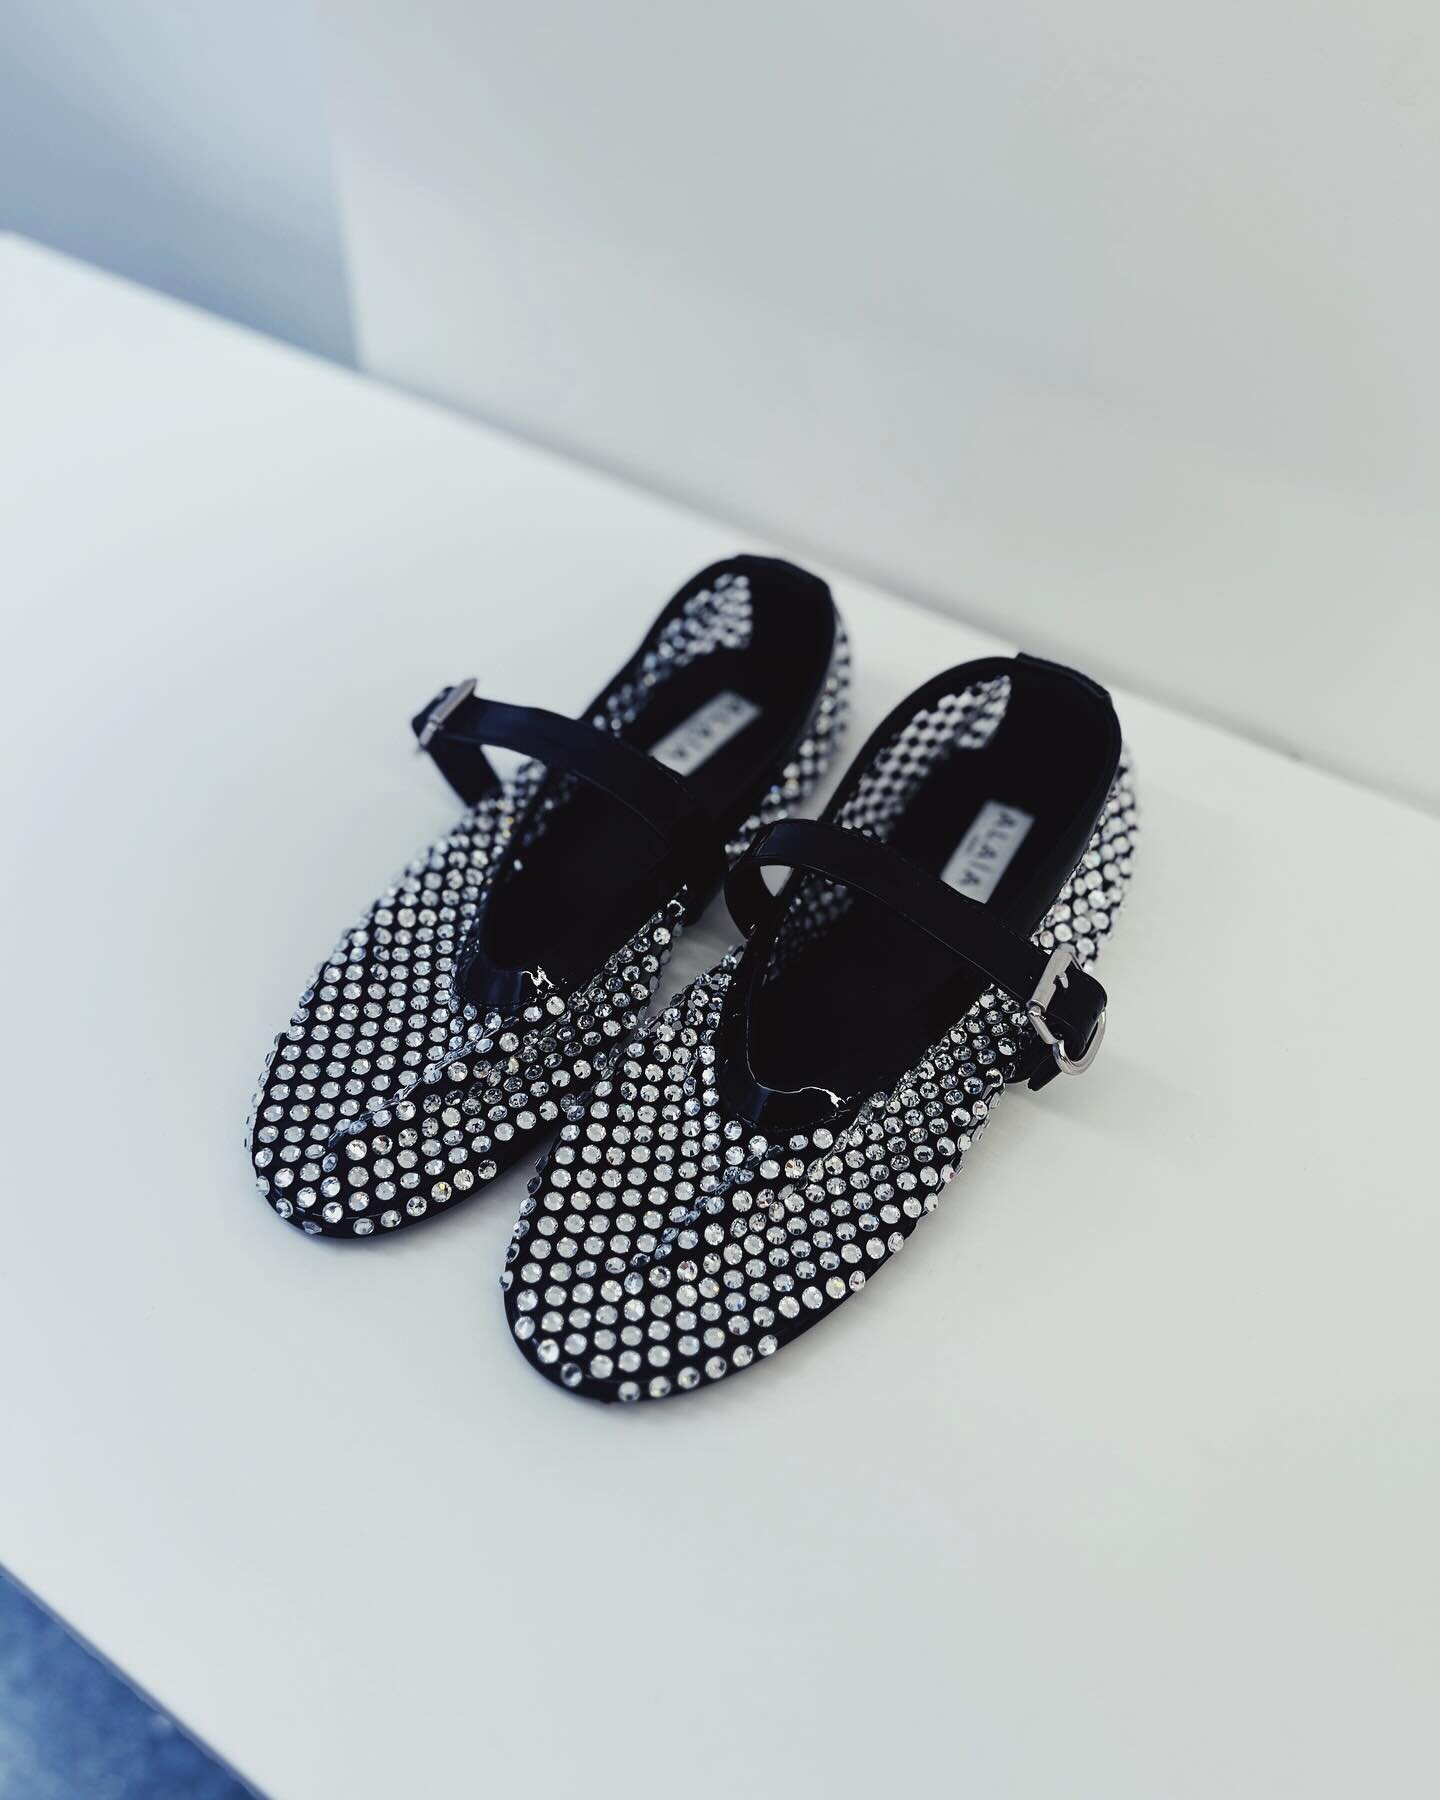 The ballet flats that nobody can keep in stock, plus more stellar accessories keeping me up at night lately from @maisonalaia and @khaite_ny 

Trend alert: studs, sparkles, grommets and various metallic accents of all kinds ✨✨✨